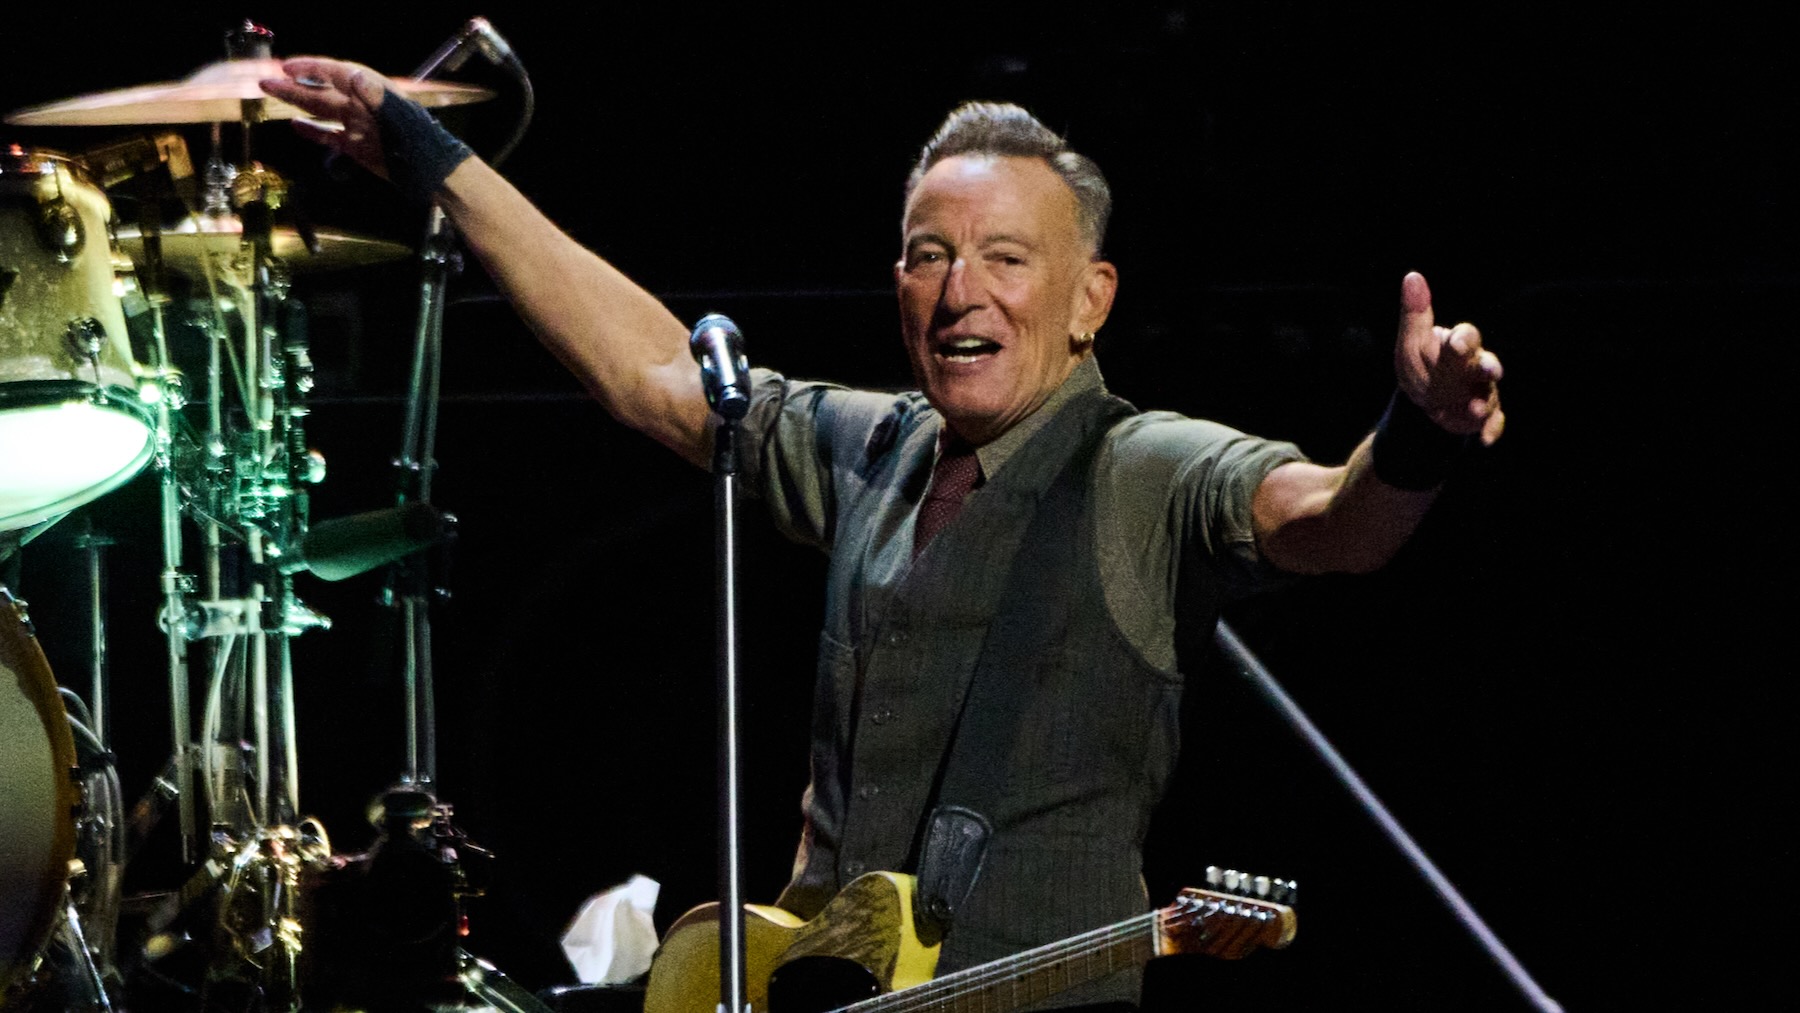 Bruce Springsteen Concert Documentary Coming to Hulu and Disney+ [Video]